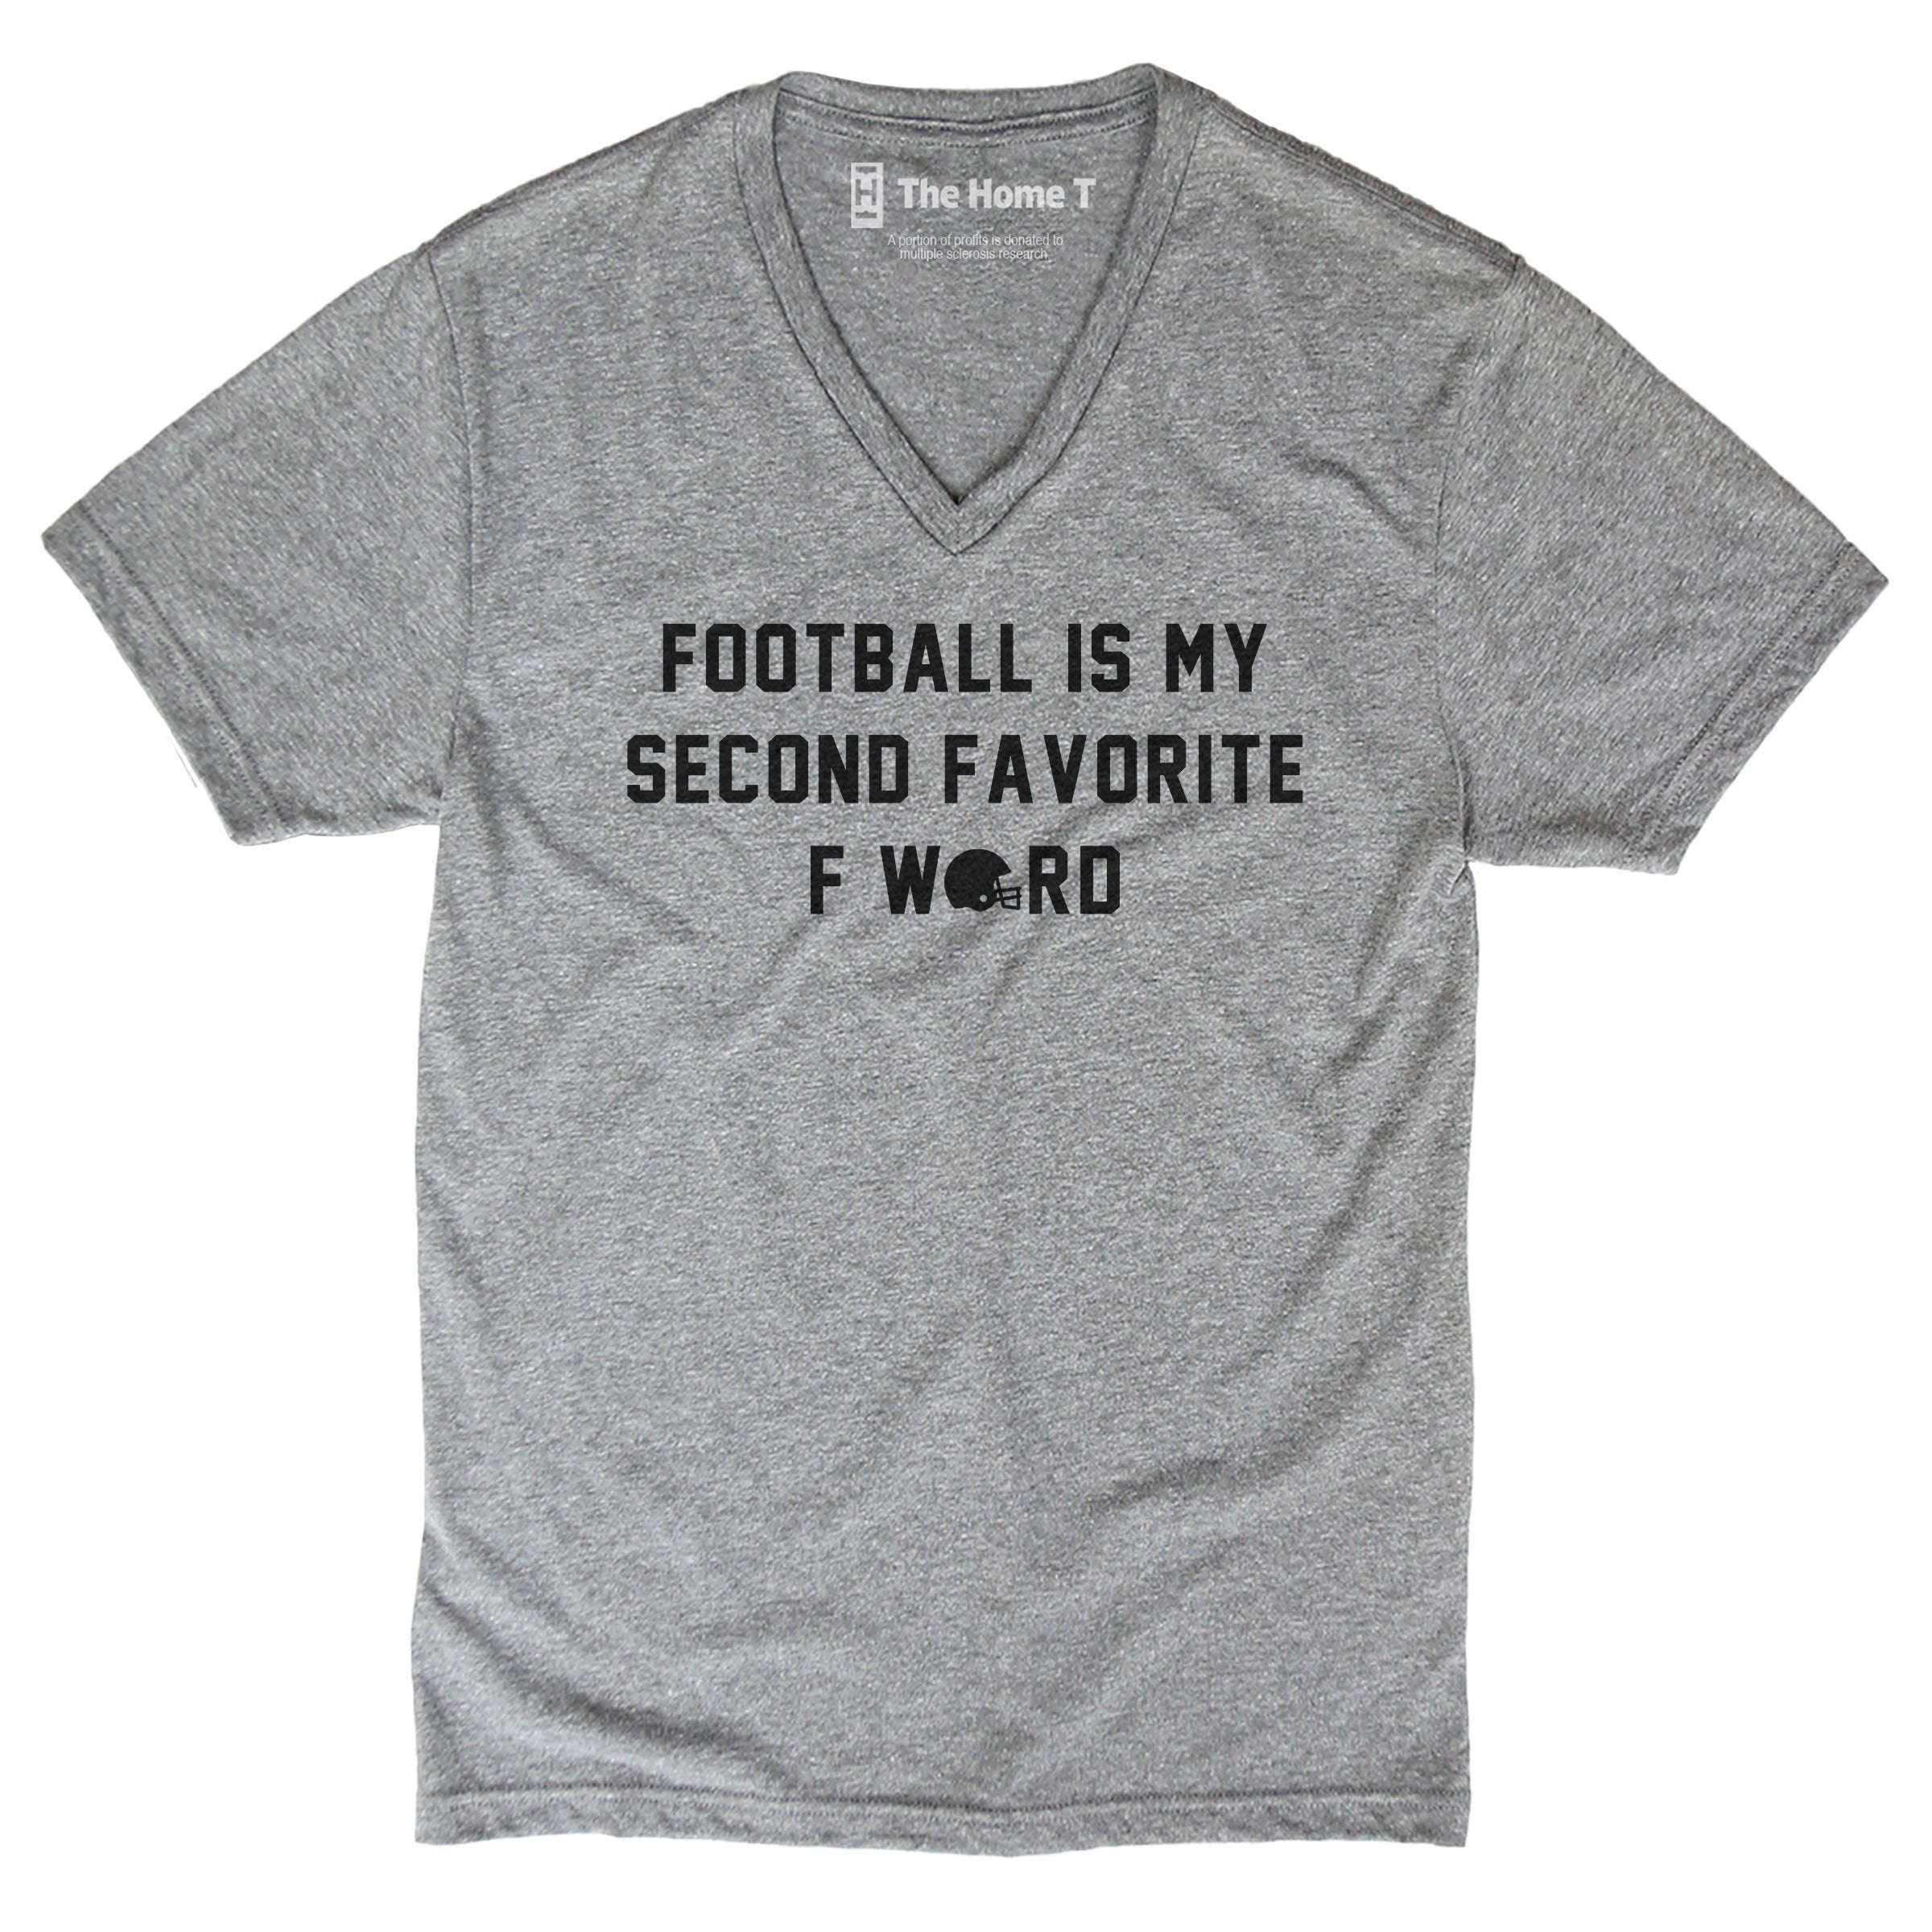 Football Is My Second Favorite F Word The Home T XS V-NECK